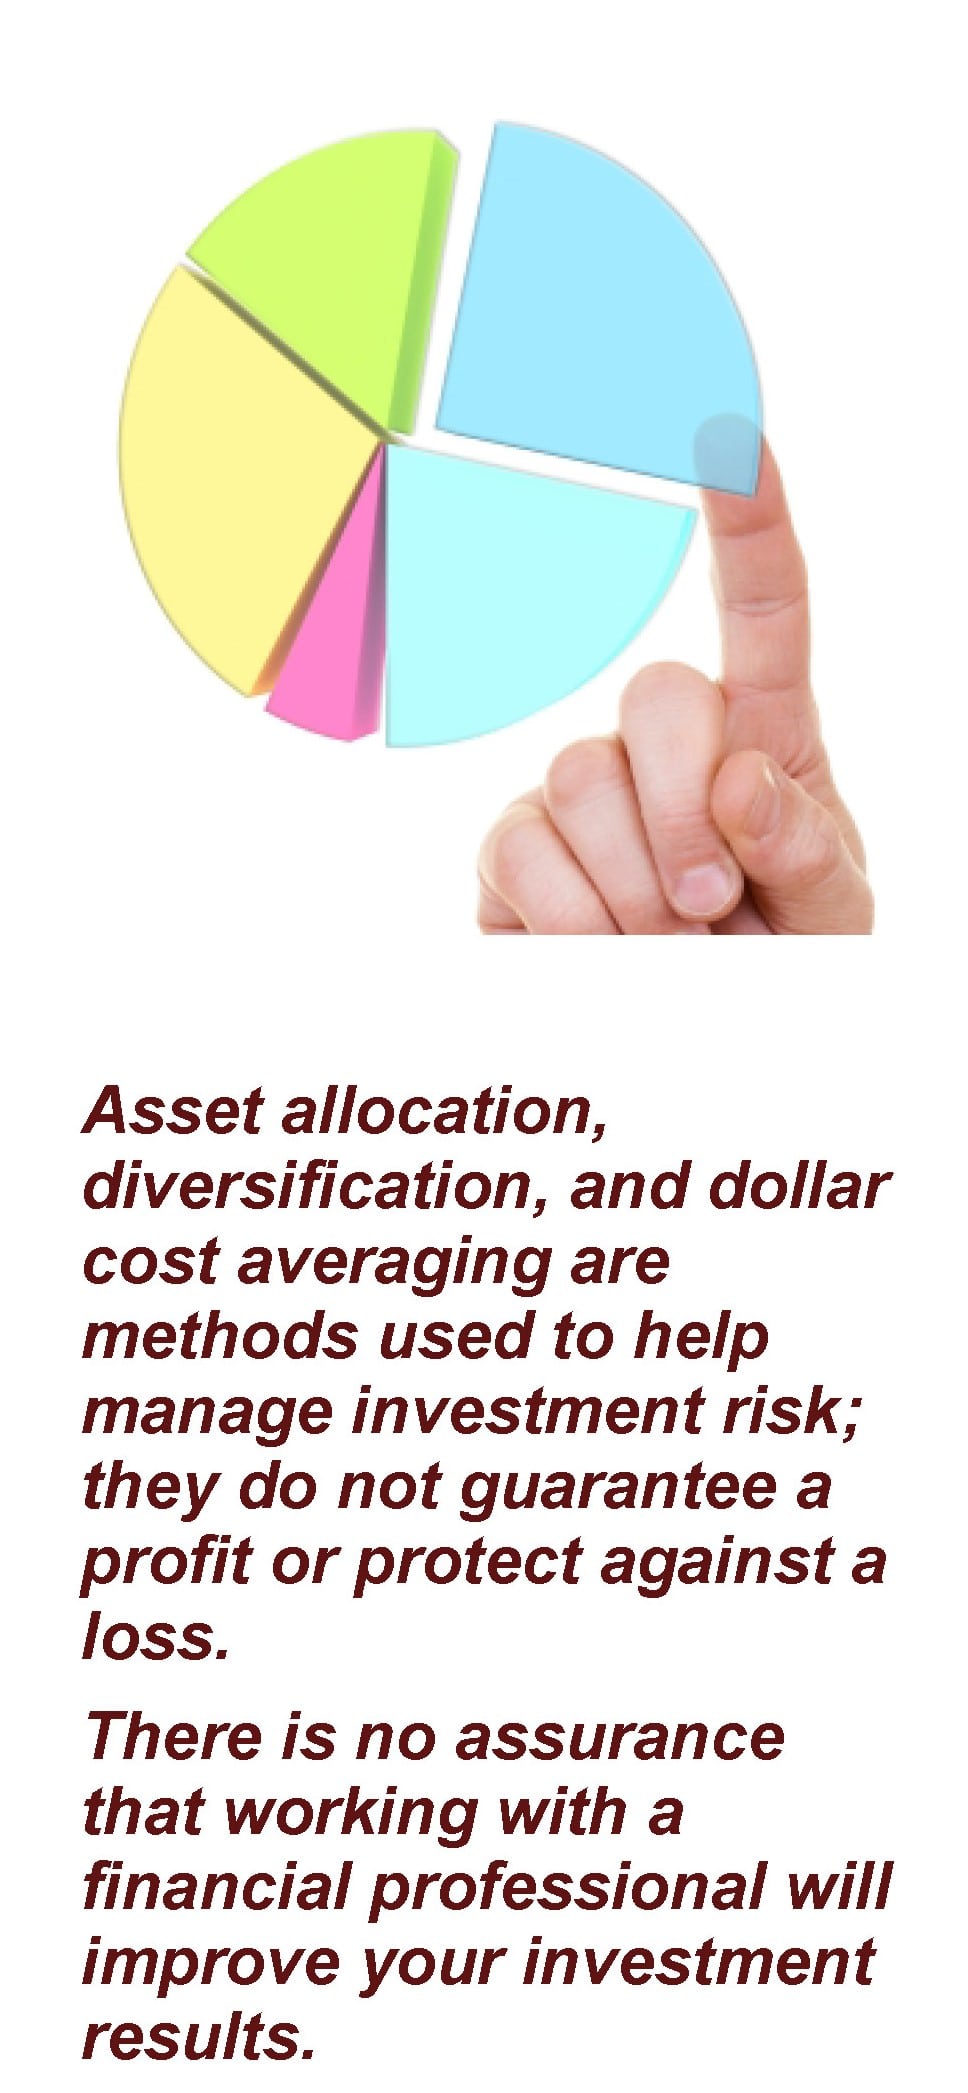 Finger pointing at a pie chart. Caption text: "Asset allocation, diversification, and dollar cost averaging are methods used to help manage investment risk; they do not guarantee a profit or protect against a loss. There is no assurance that working with a financial professional will improve your investment results." Article title: Risk Management and Your Retirement Savings Plan